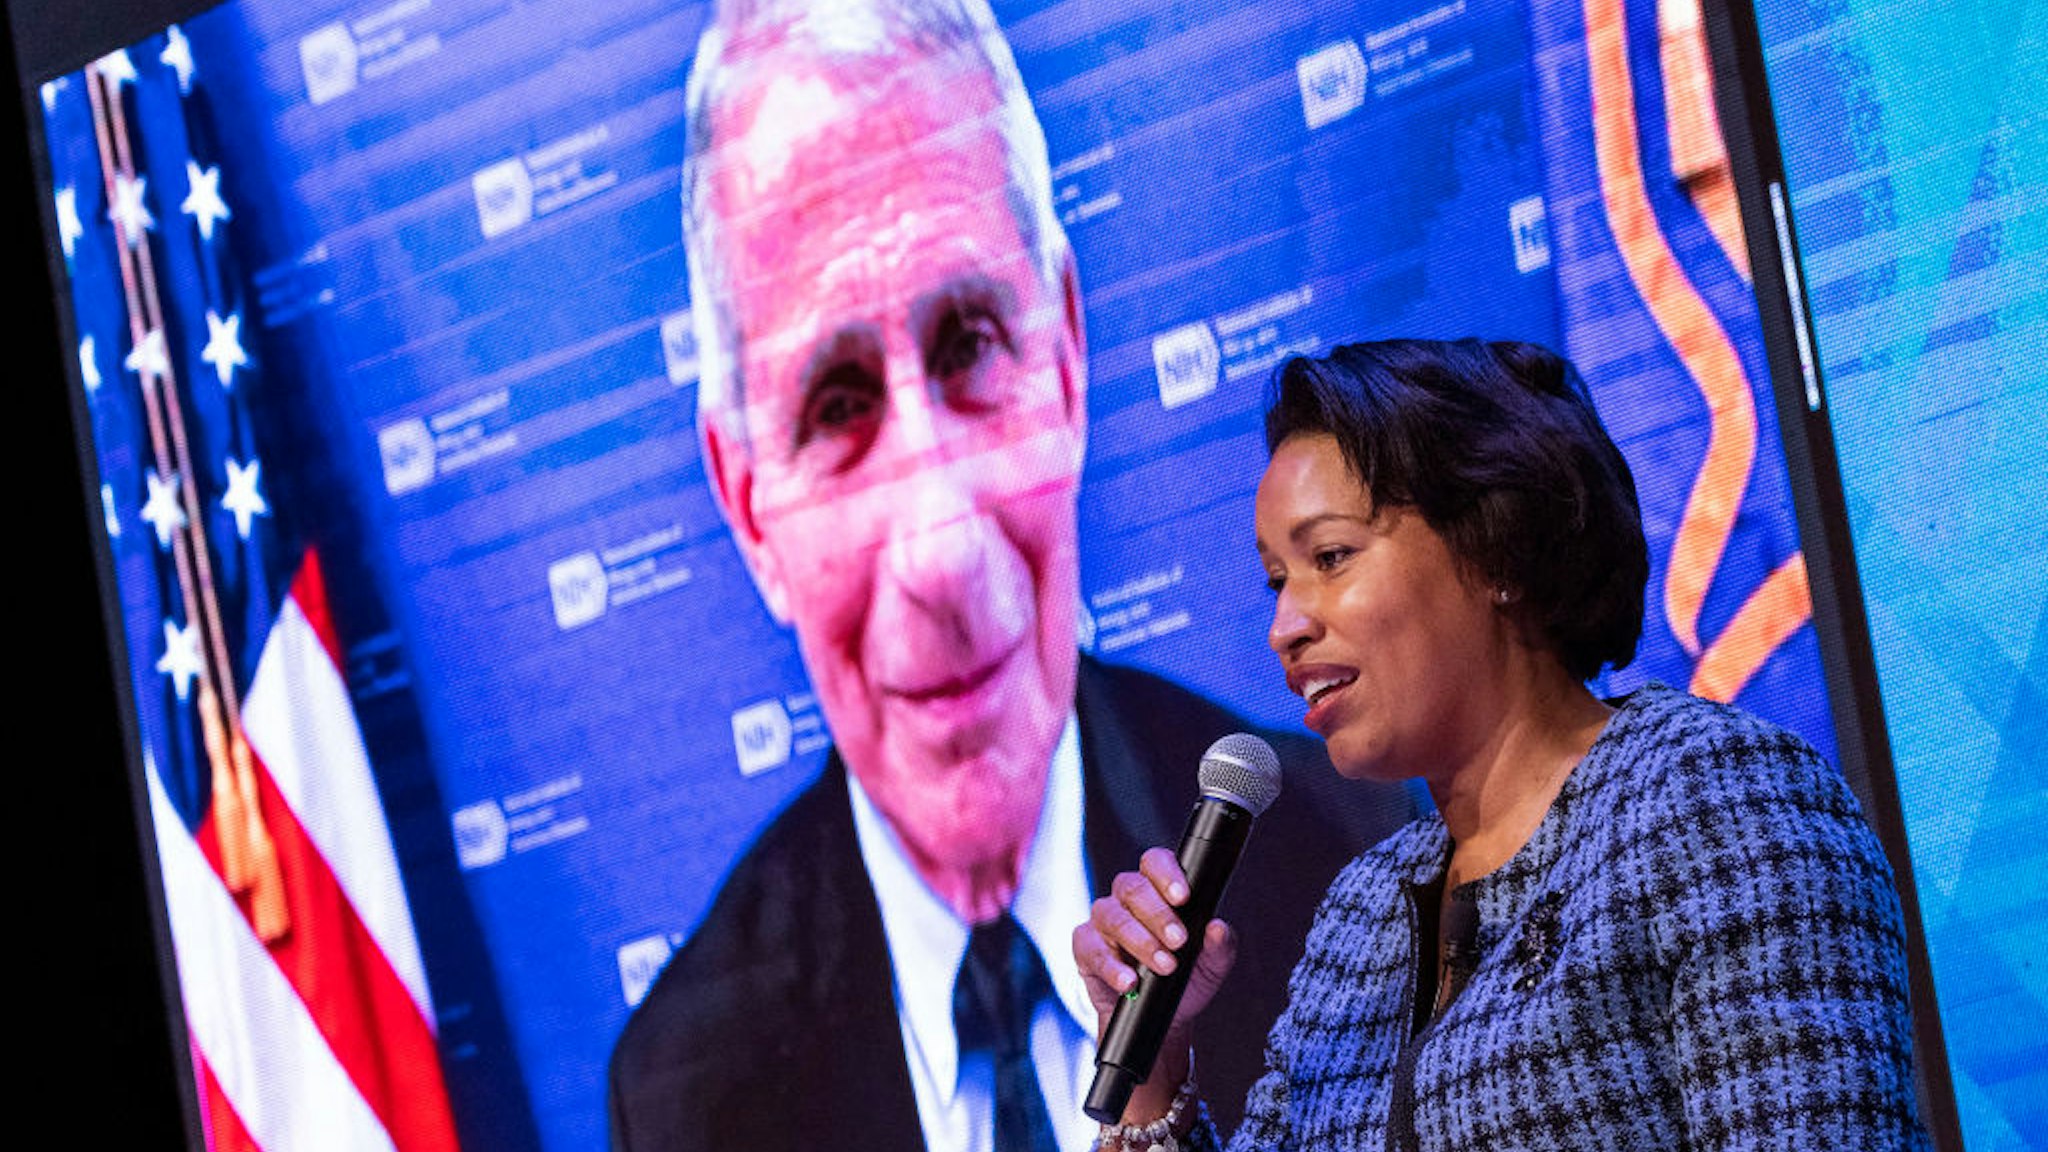 Dr. Anthony Fauci Holds Discussion With DC Mayor And DC Health Officials